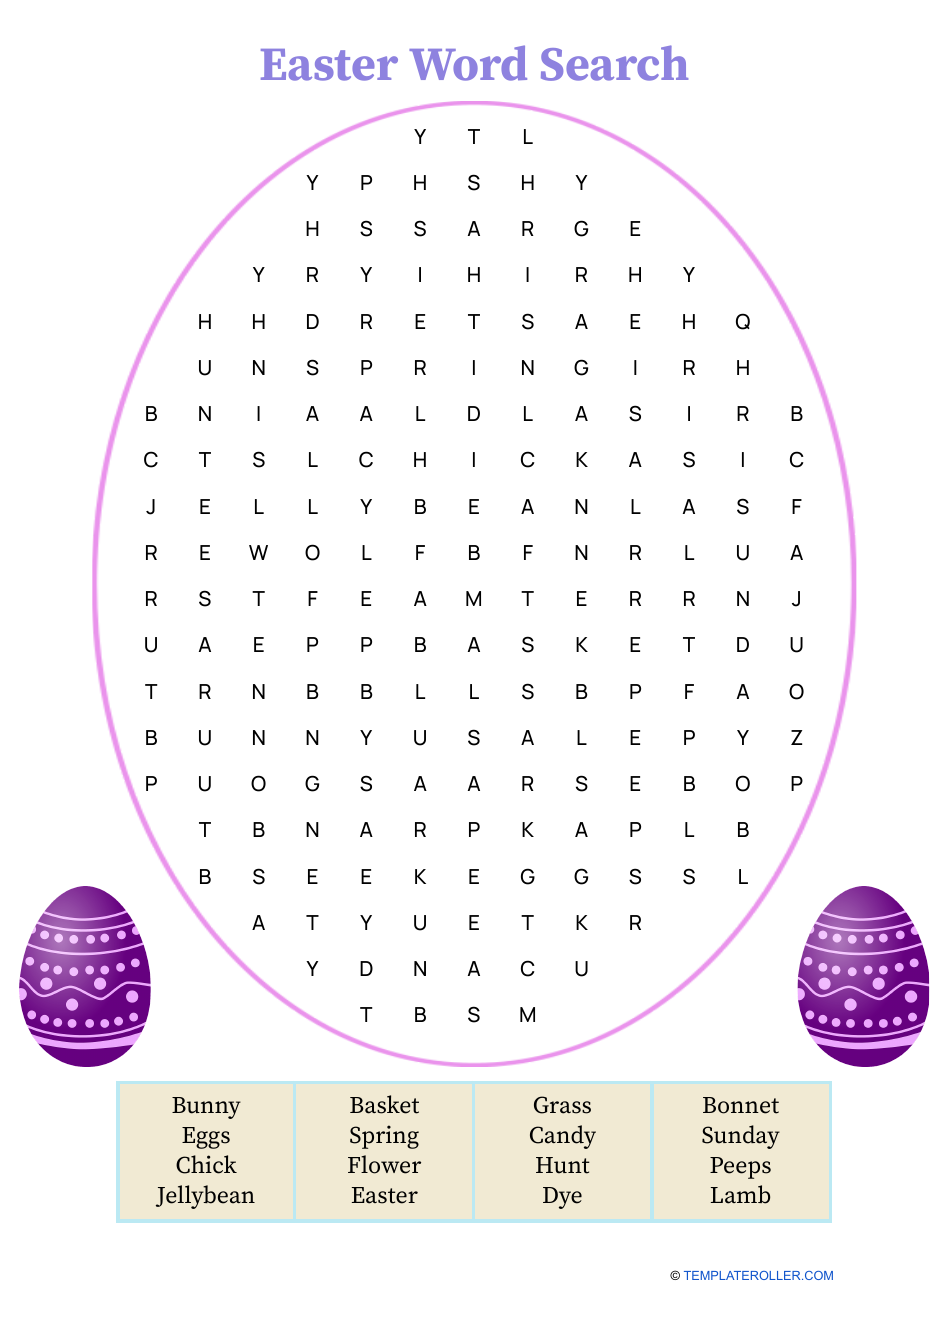 Easter Word Search - Violet Image